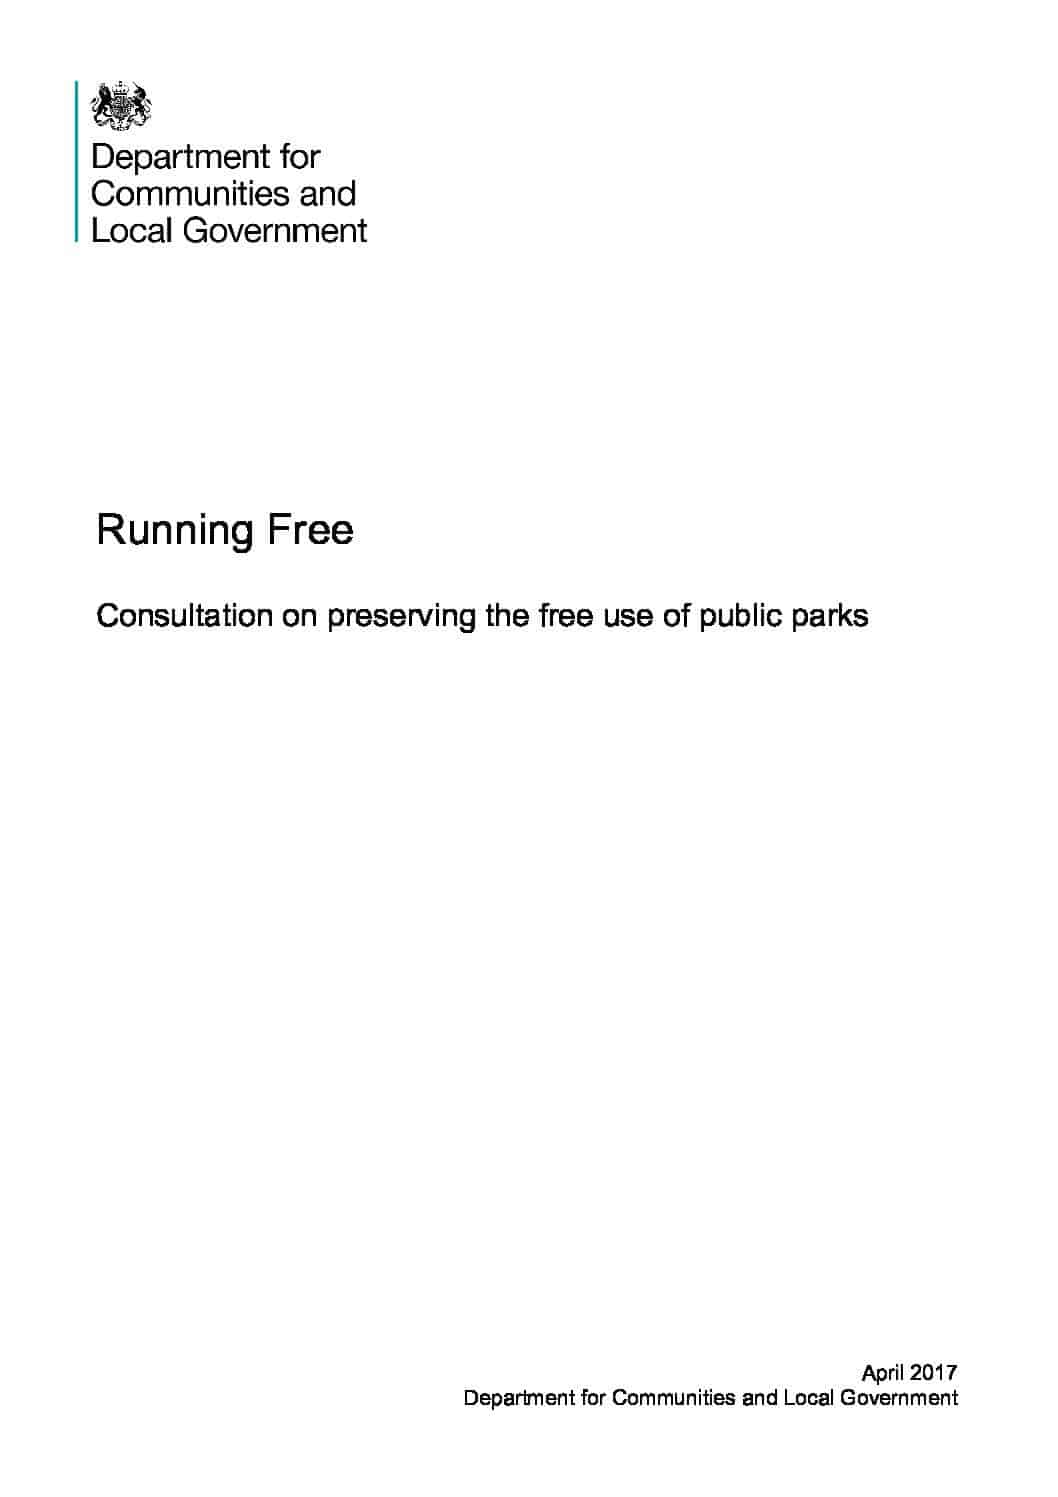 Running Free – a consultation on preserving the free use of public parks